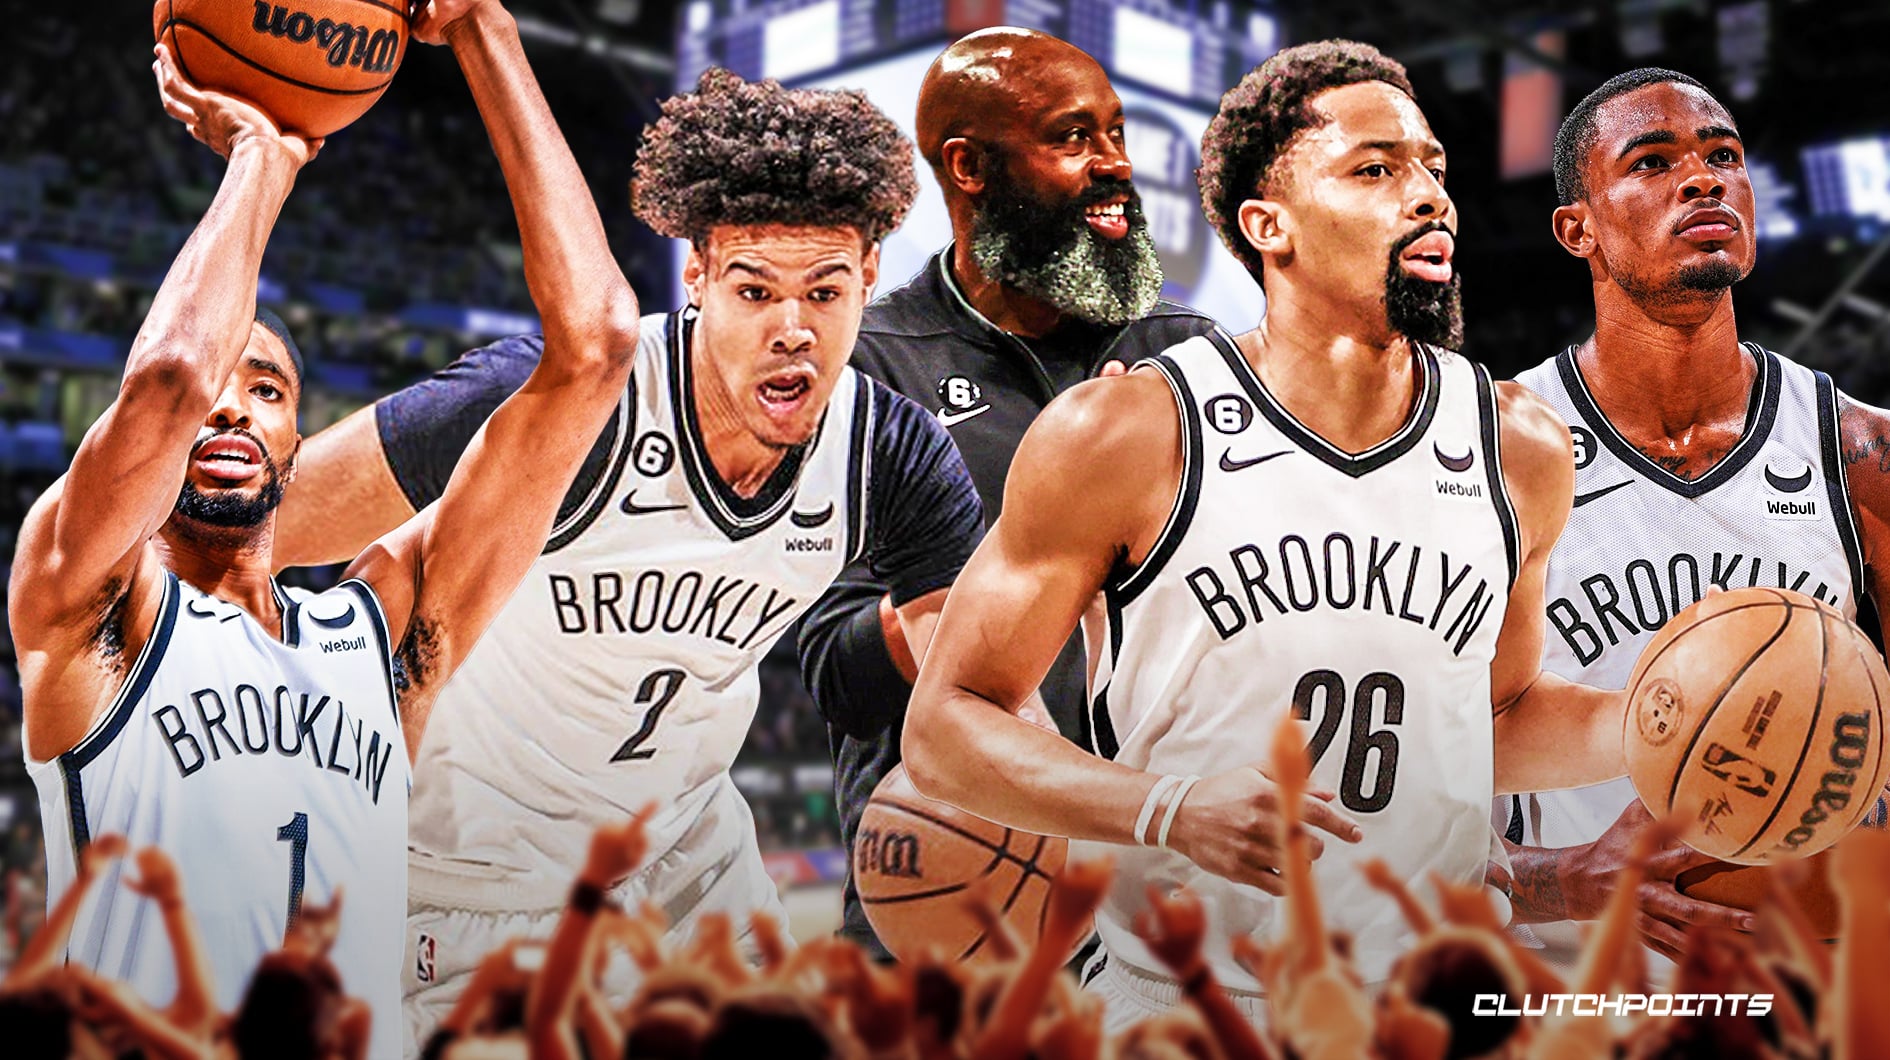 Nets How Mikal Bridges, newlook core 4 has Brooklyn surging into playoffs